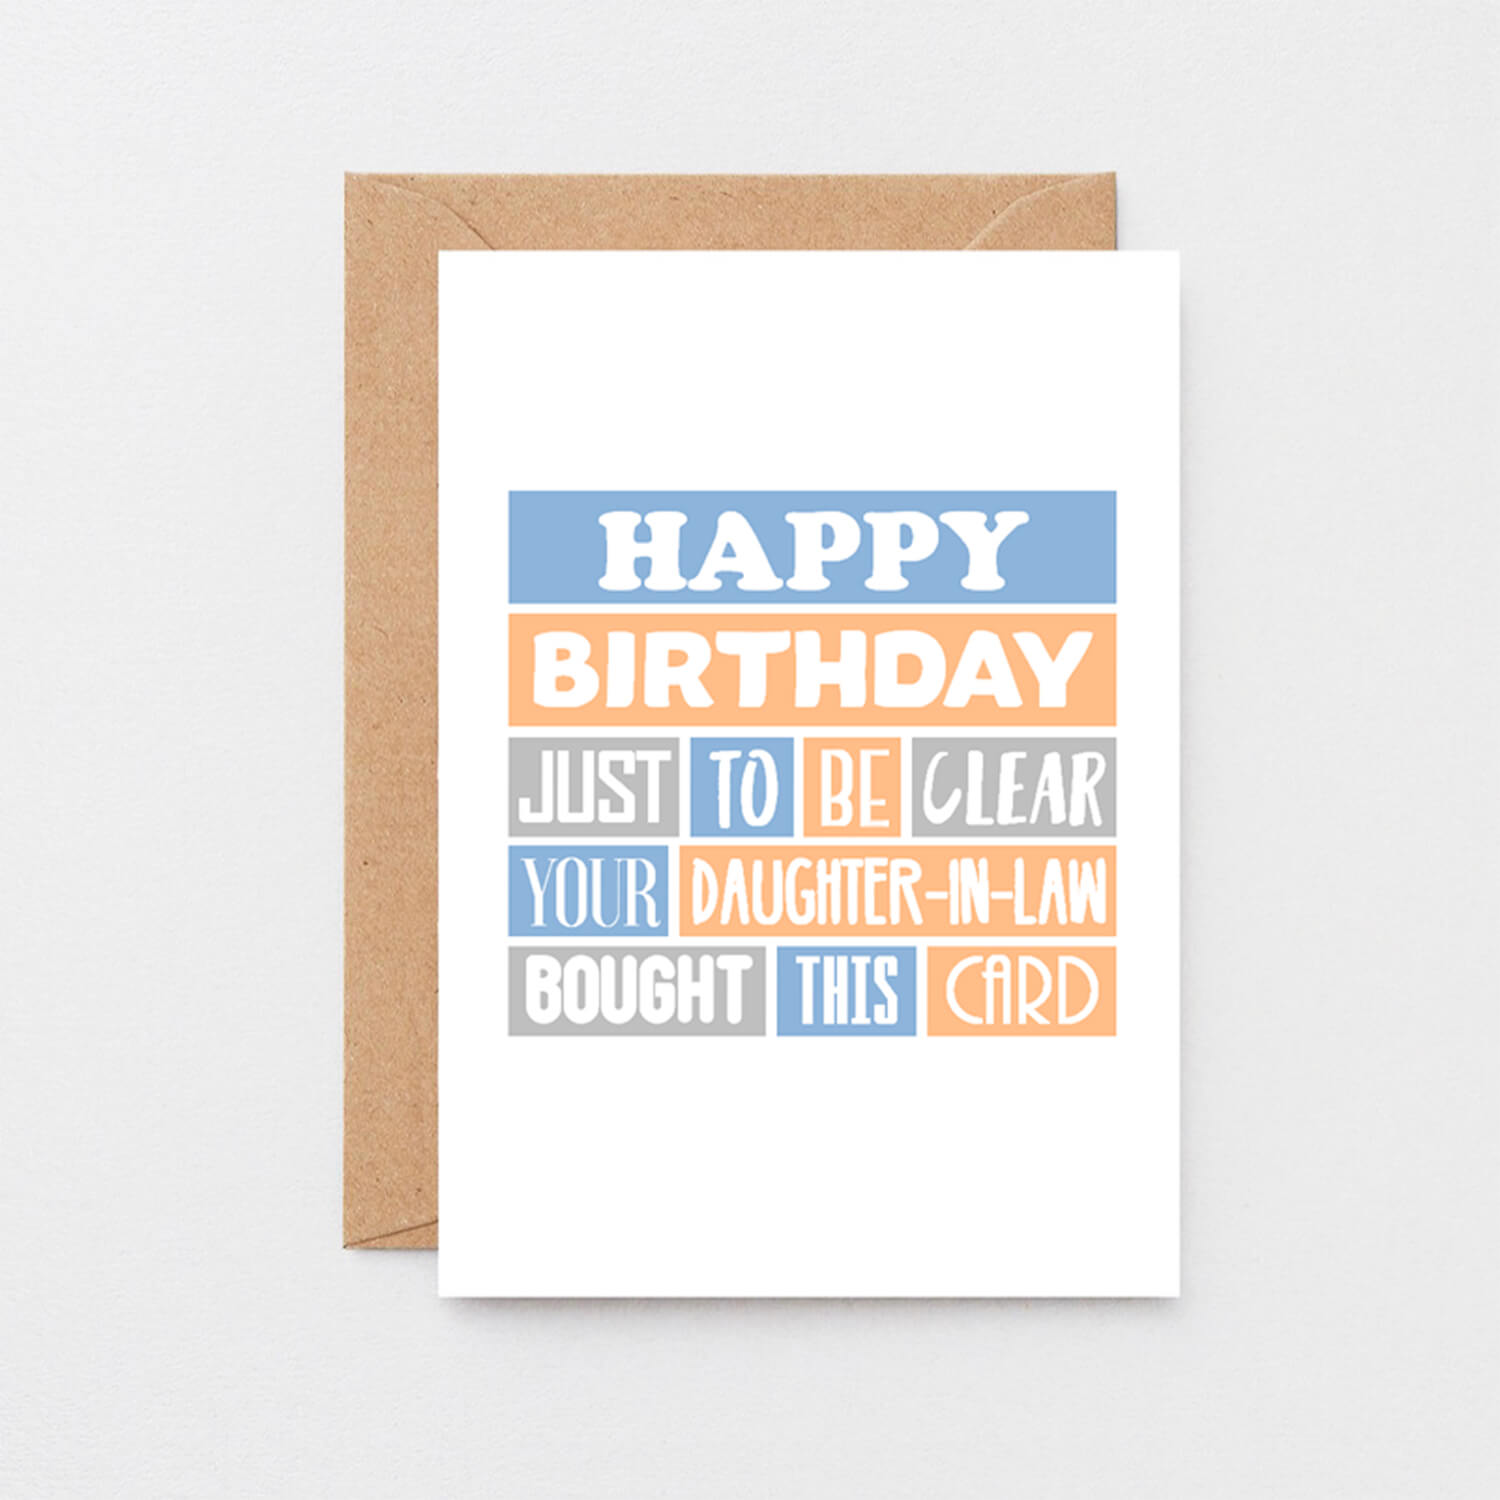 Mother-in-Law Birthday Card by SixElevenCreations. Reads Happy birthday. Just to be clear your daughter-in-law bought this card. Product Code SE0205A6